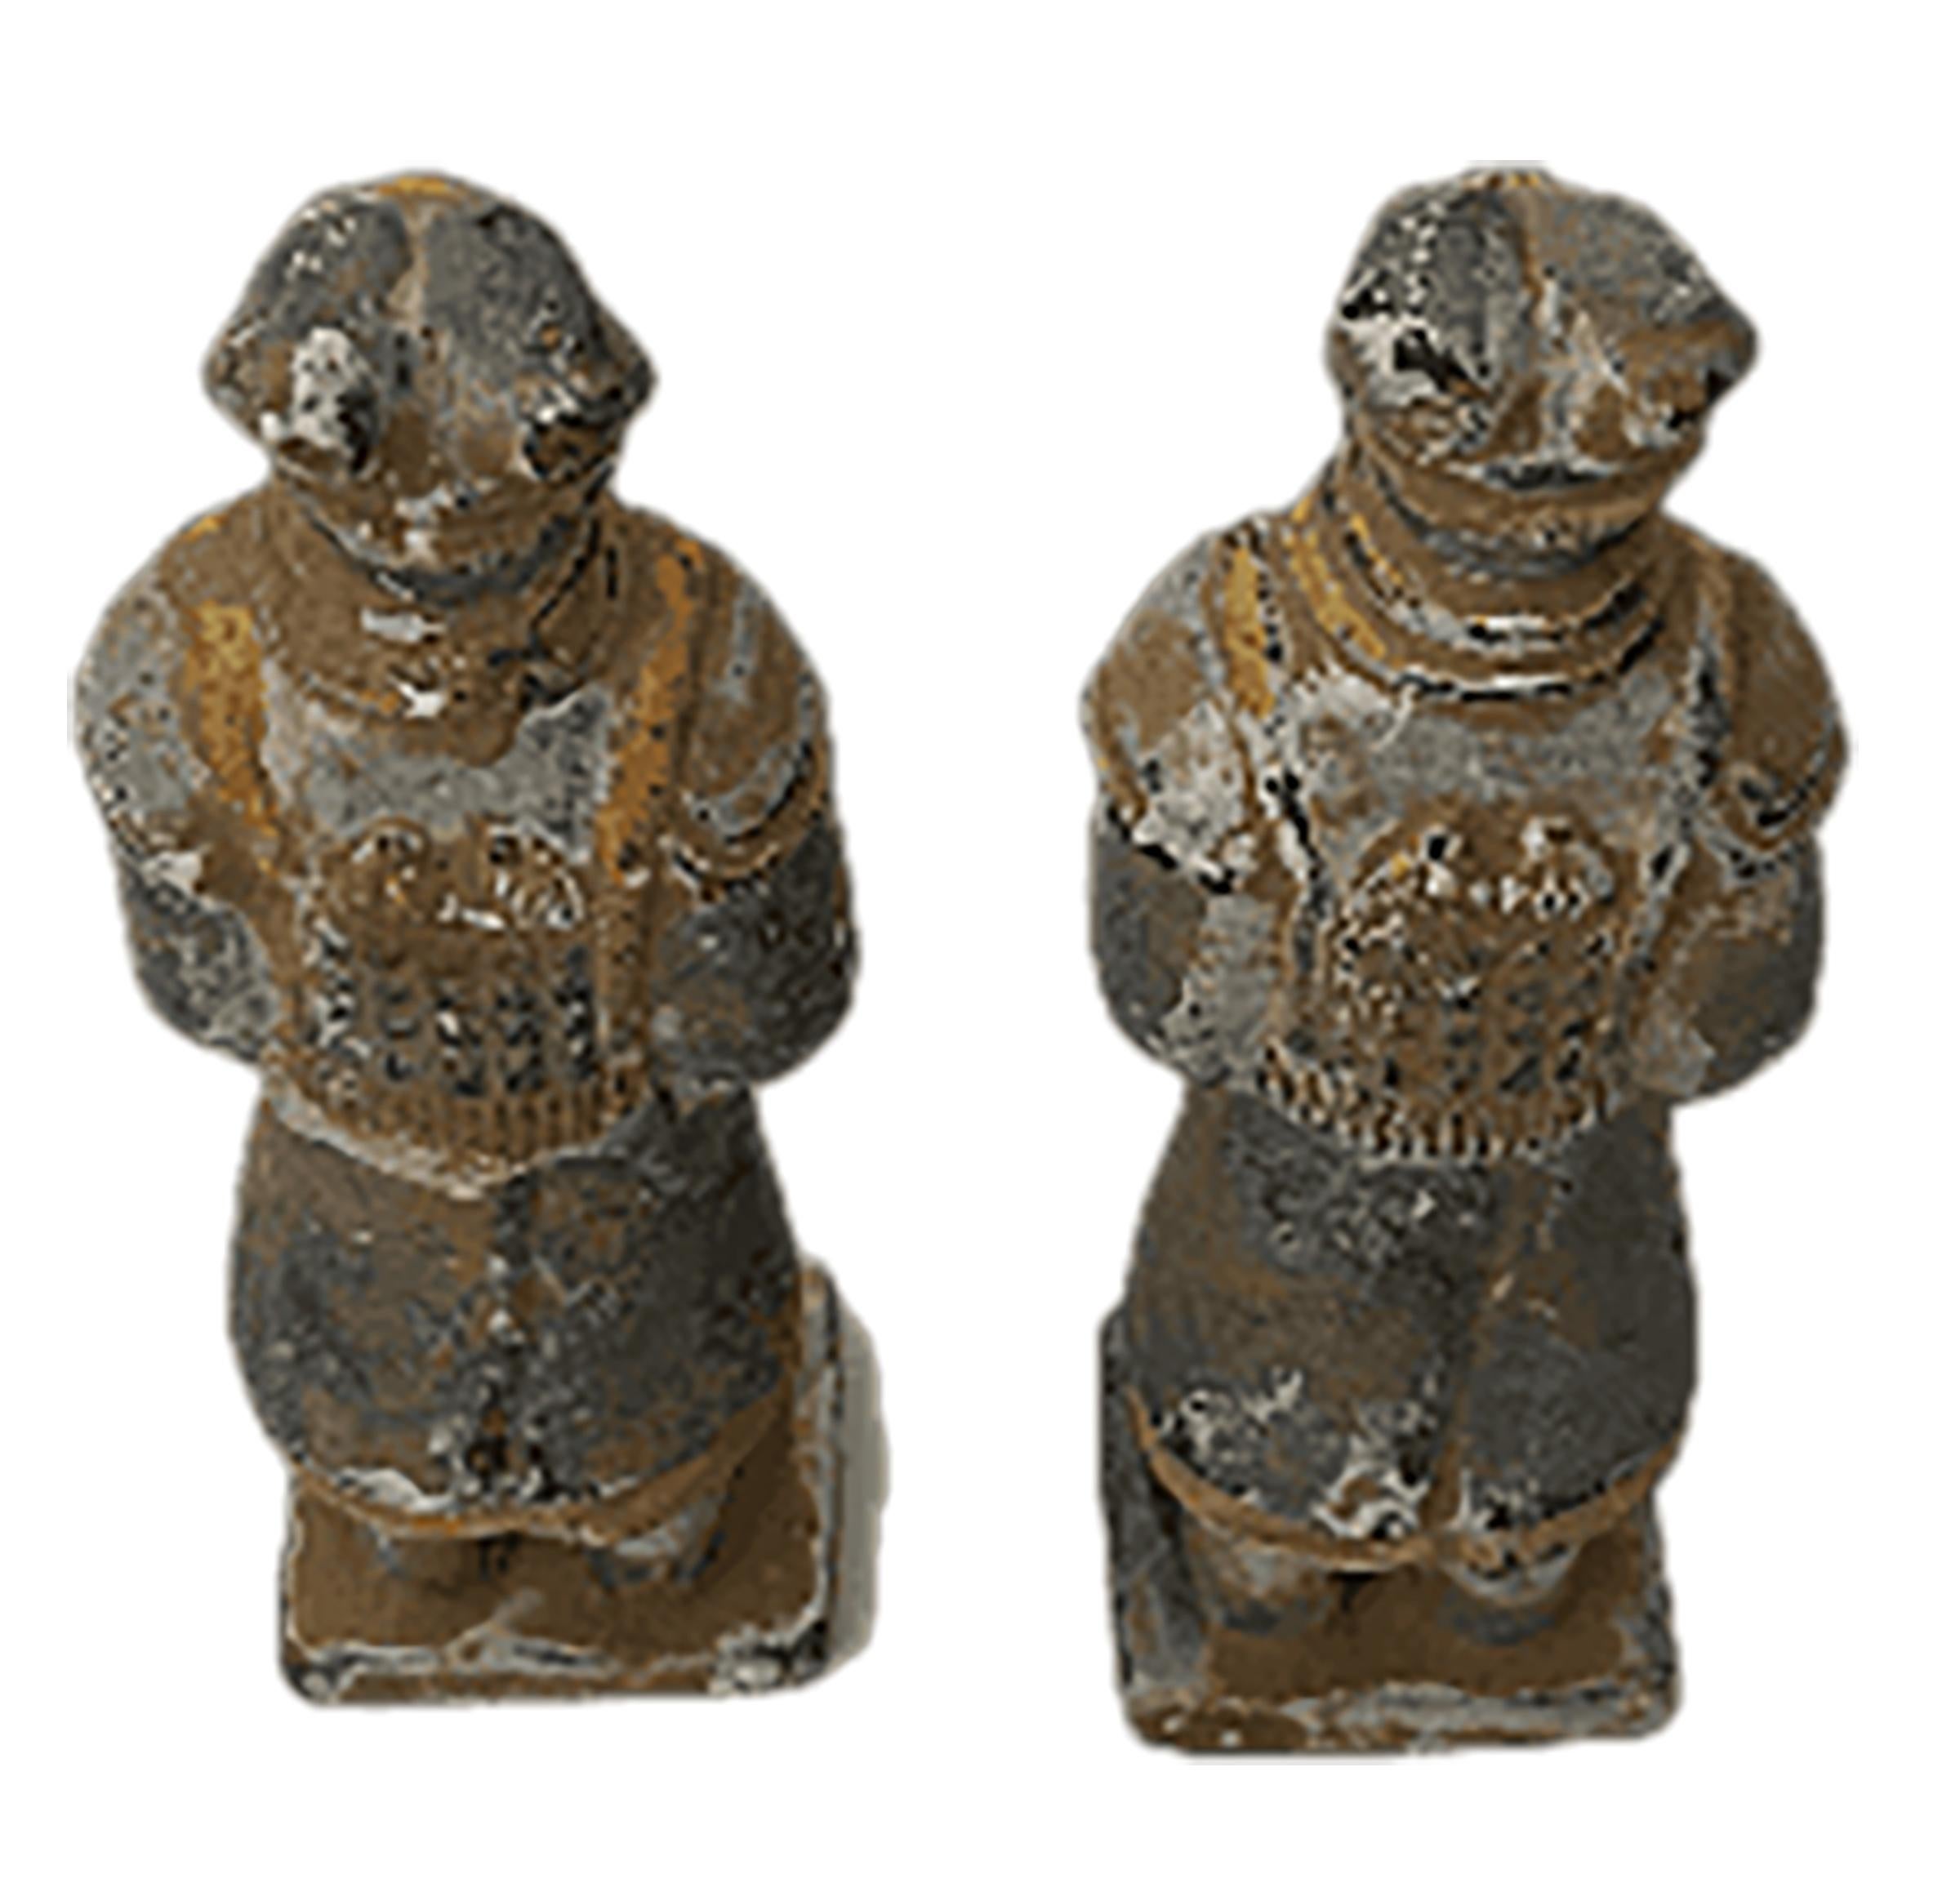 Hand-Carved A pair of miniature Chinese terracotta burial soldier figurines